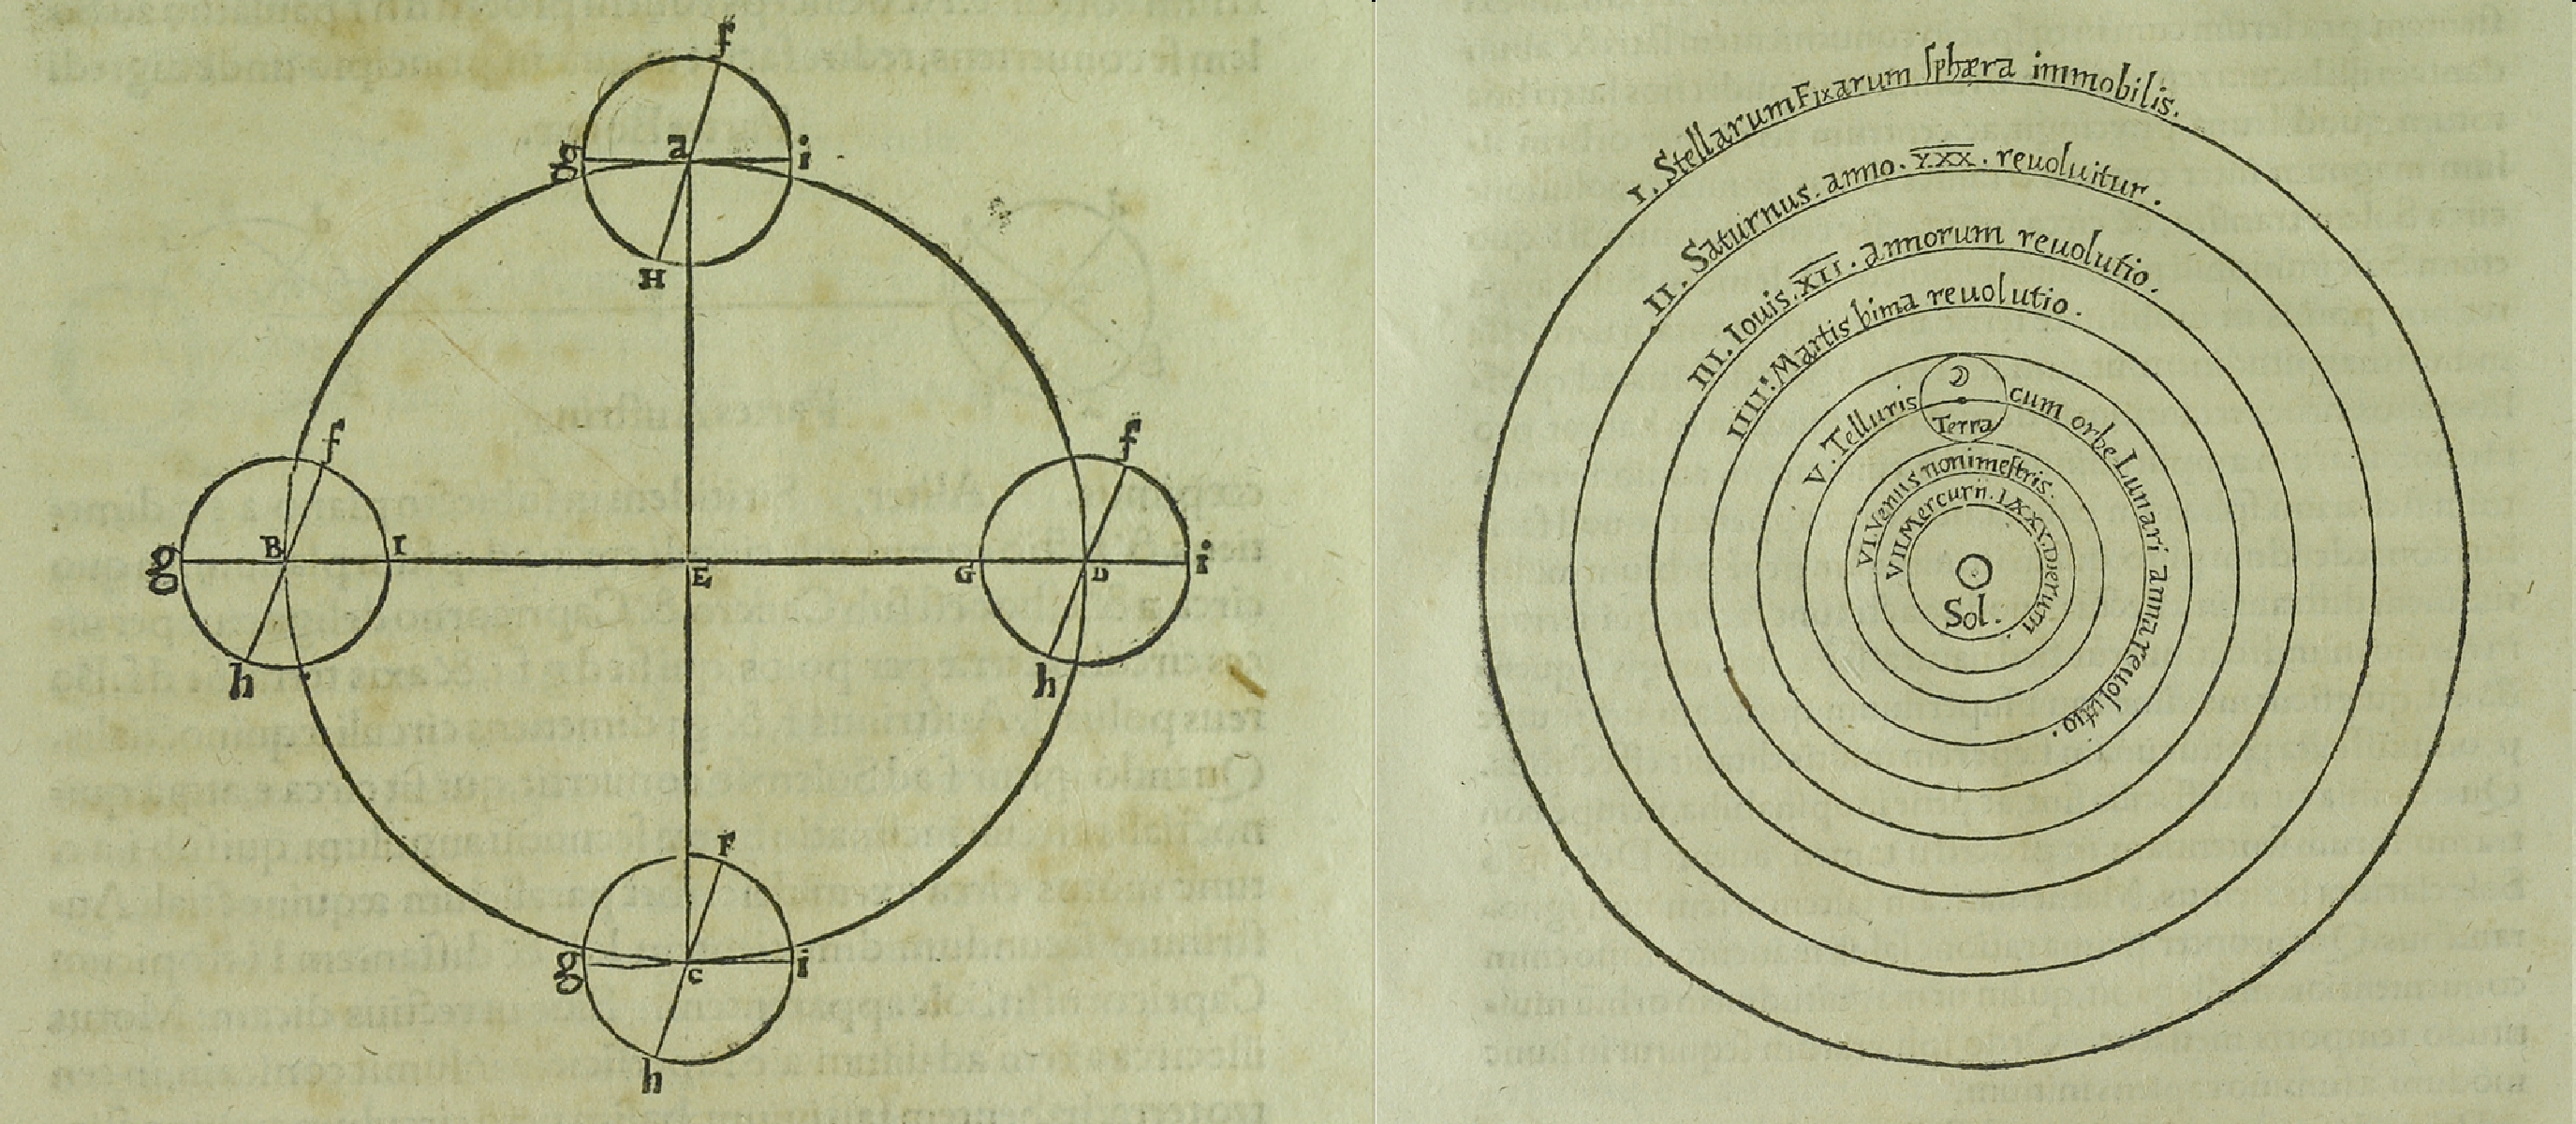 Drawings from De Revolutionibus by Nicolas Copernicus showing the planets revolving around the sun and the different motions of the earth.